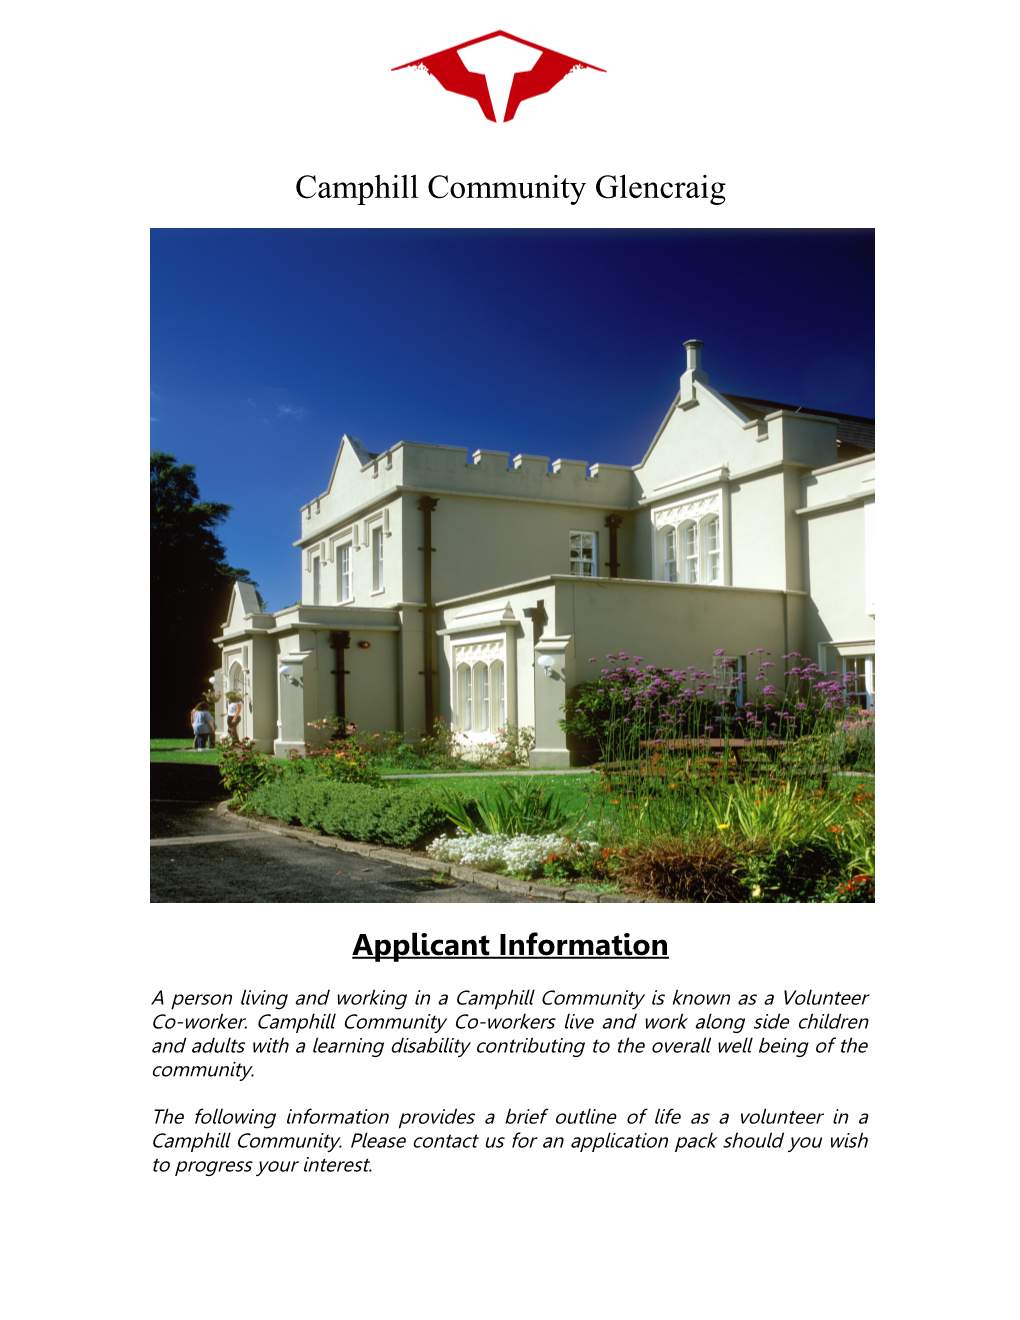 People, Interested to Join Camphill and Work and Live in a Camphill Community Call Themselves